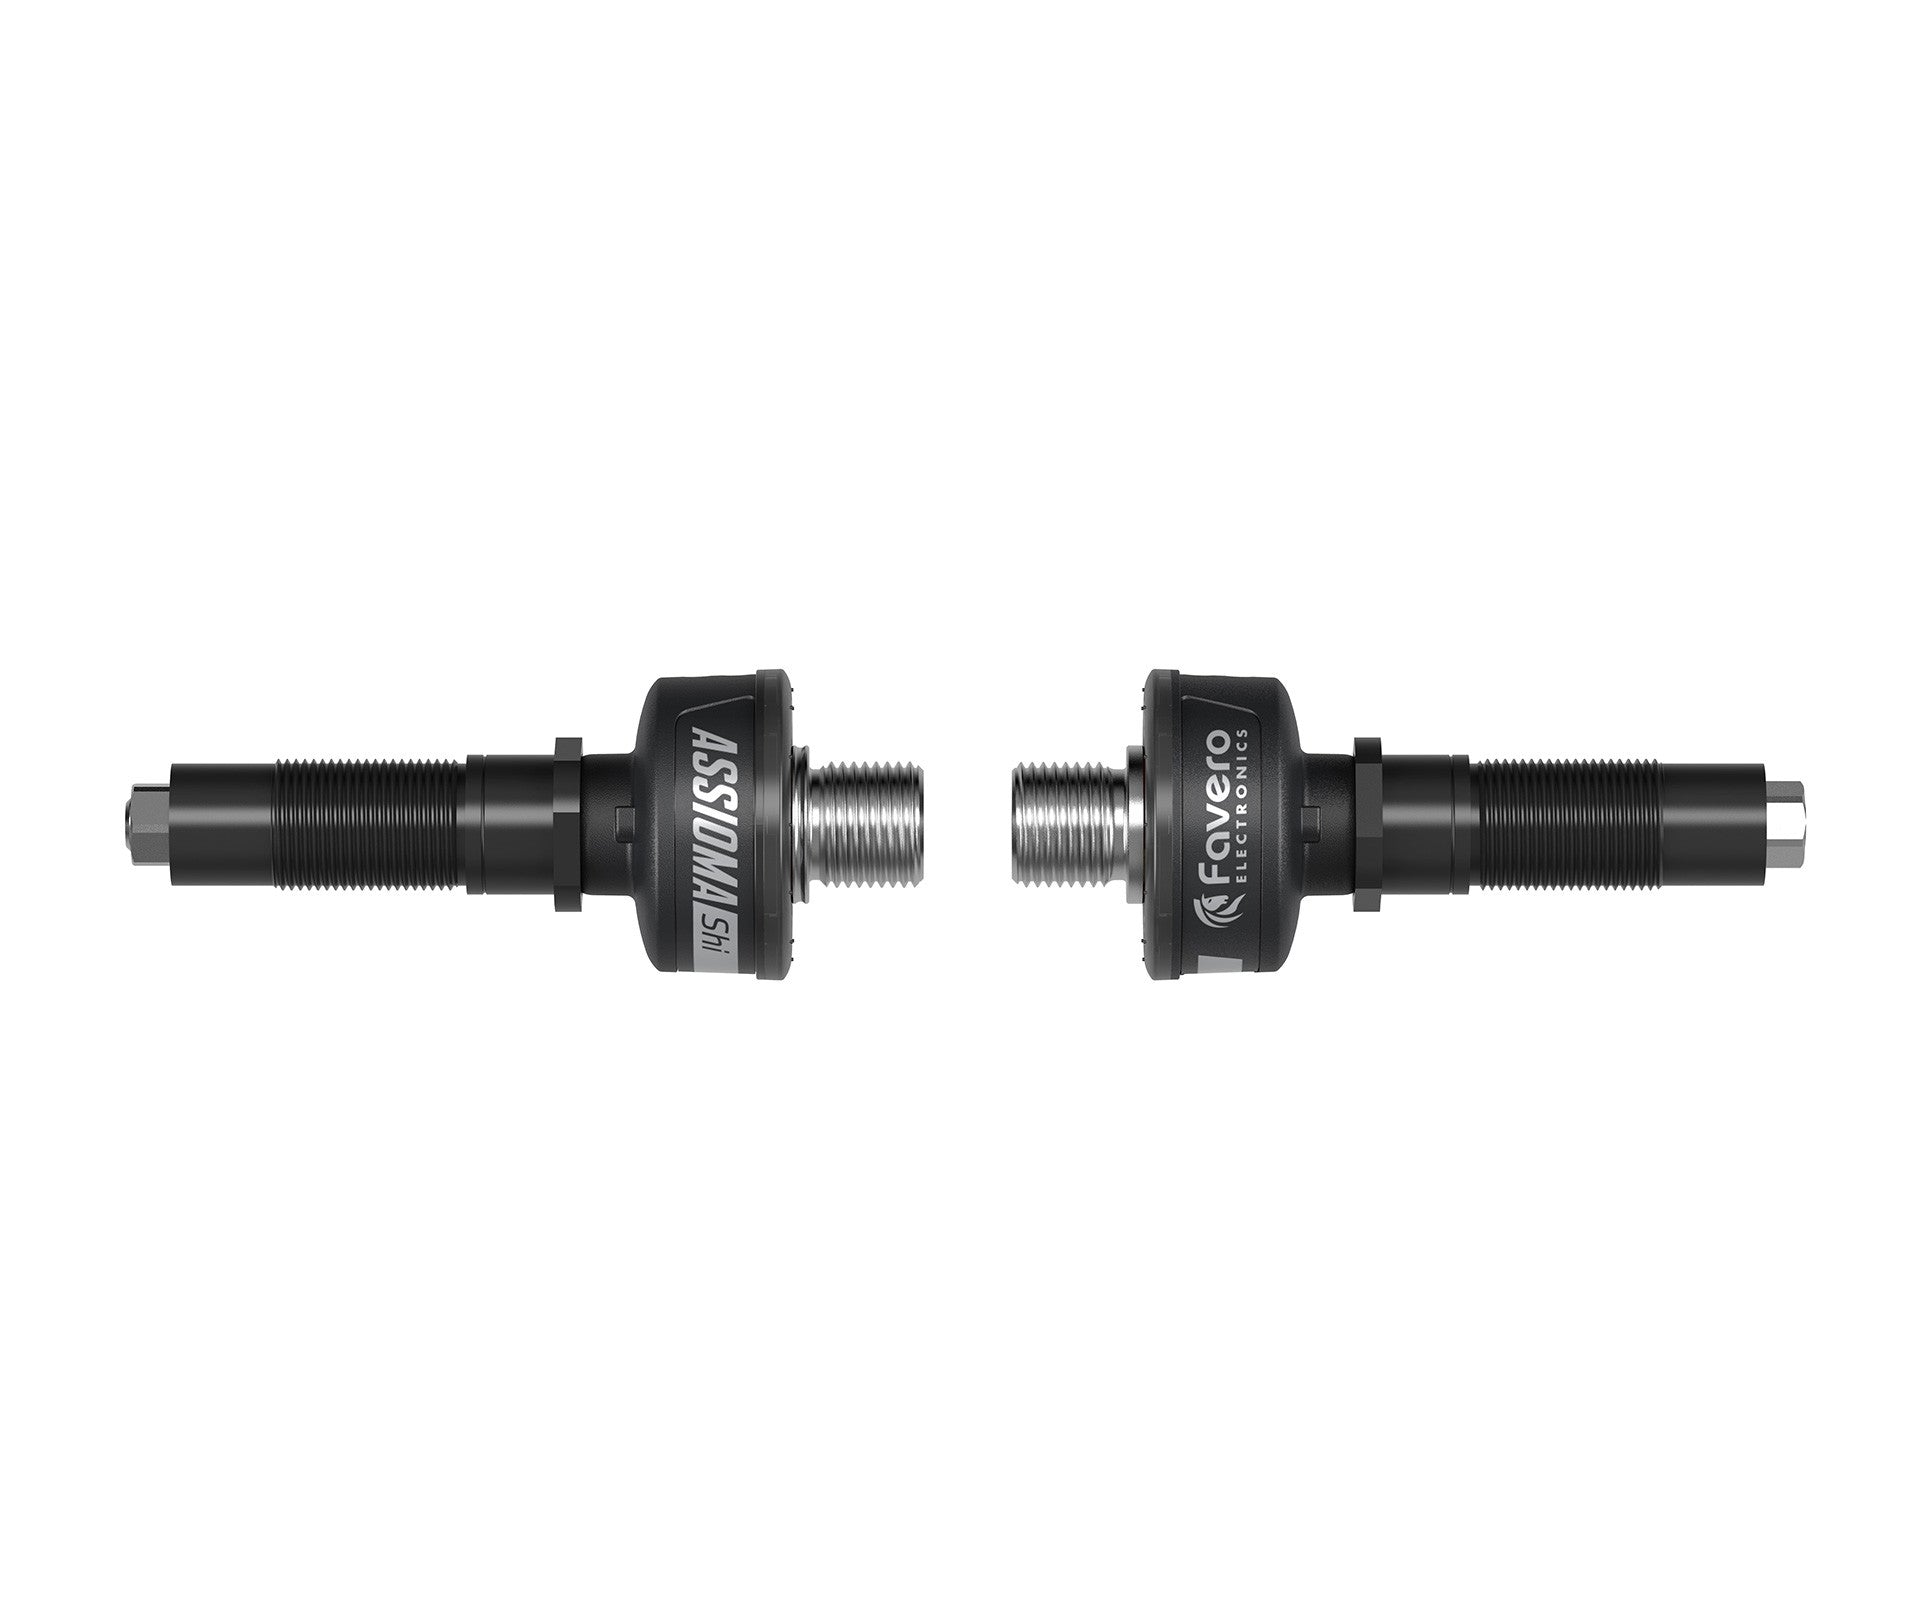 FAVERO ASSIOMA DUO DOUBLE SIDE POWER METER SPINDLES - FOR SHIMANO - ANT+ POWER CADENCE TORQUE CYCLING SYDNEY AUSTRALIA BIKE SHOP